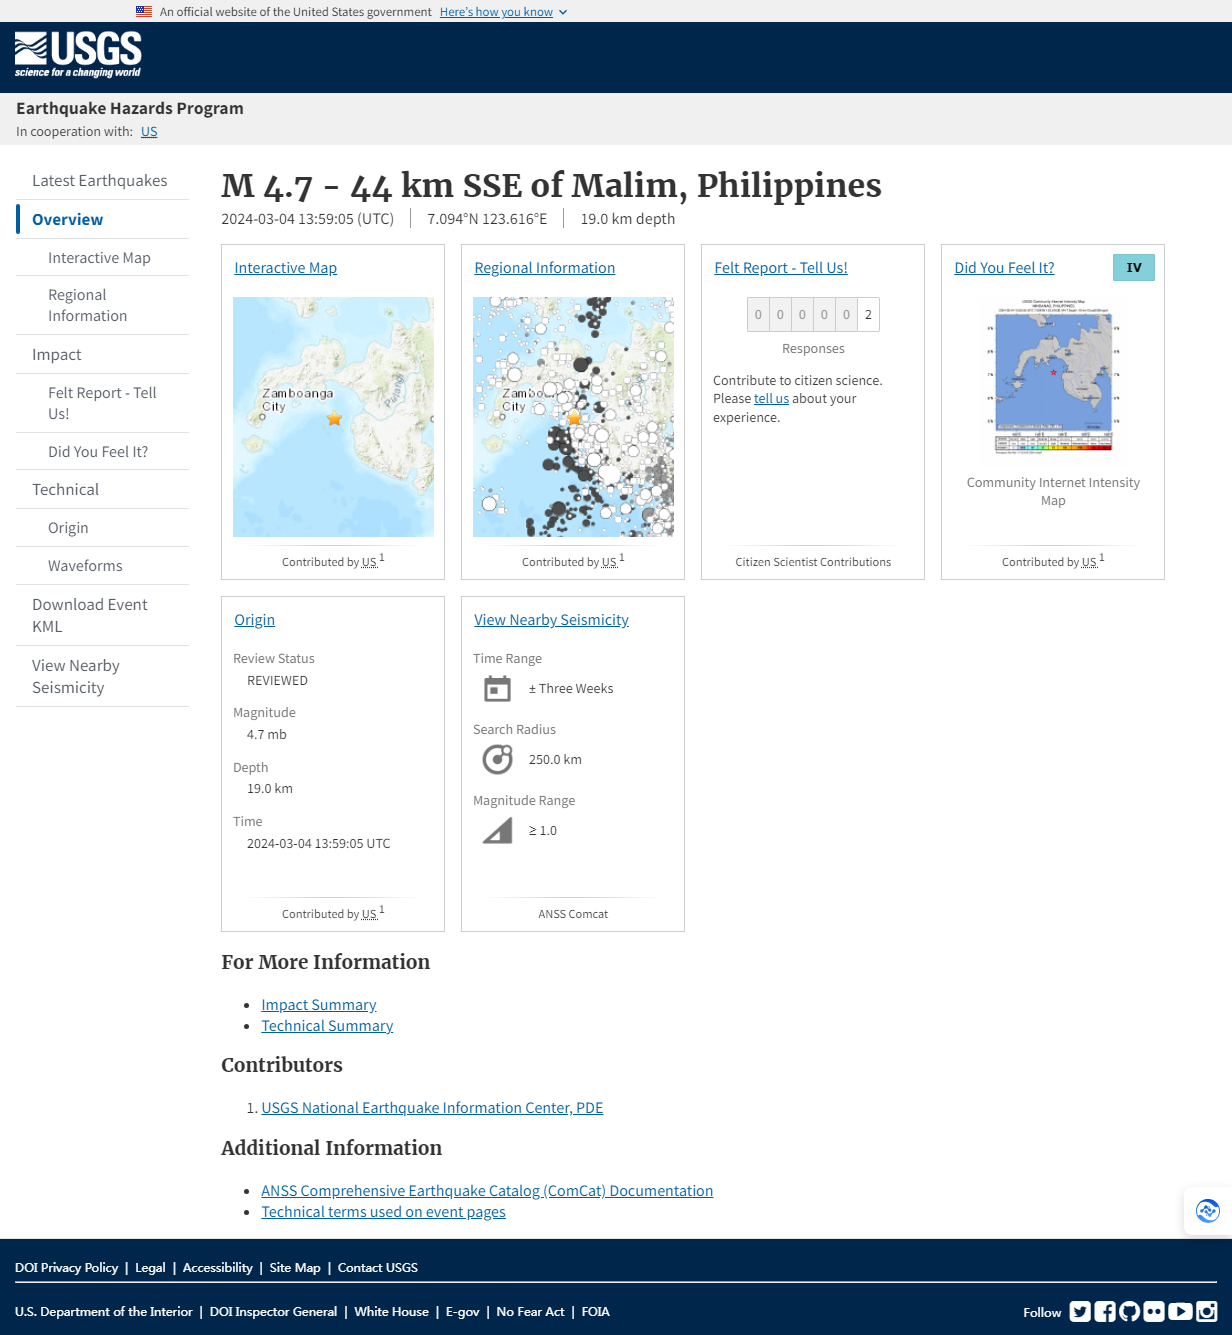 M 4.7 - 44 km SSE of Malim, Philippines.png